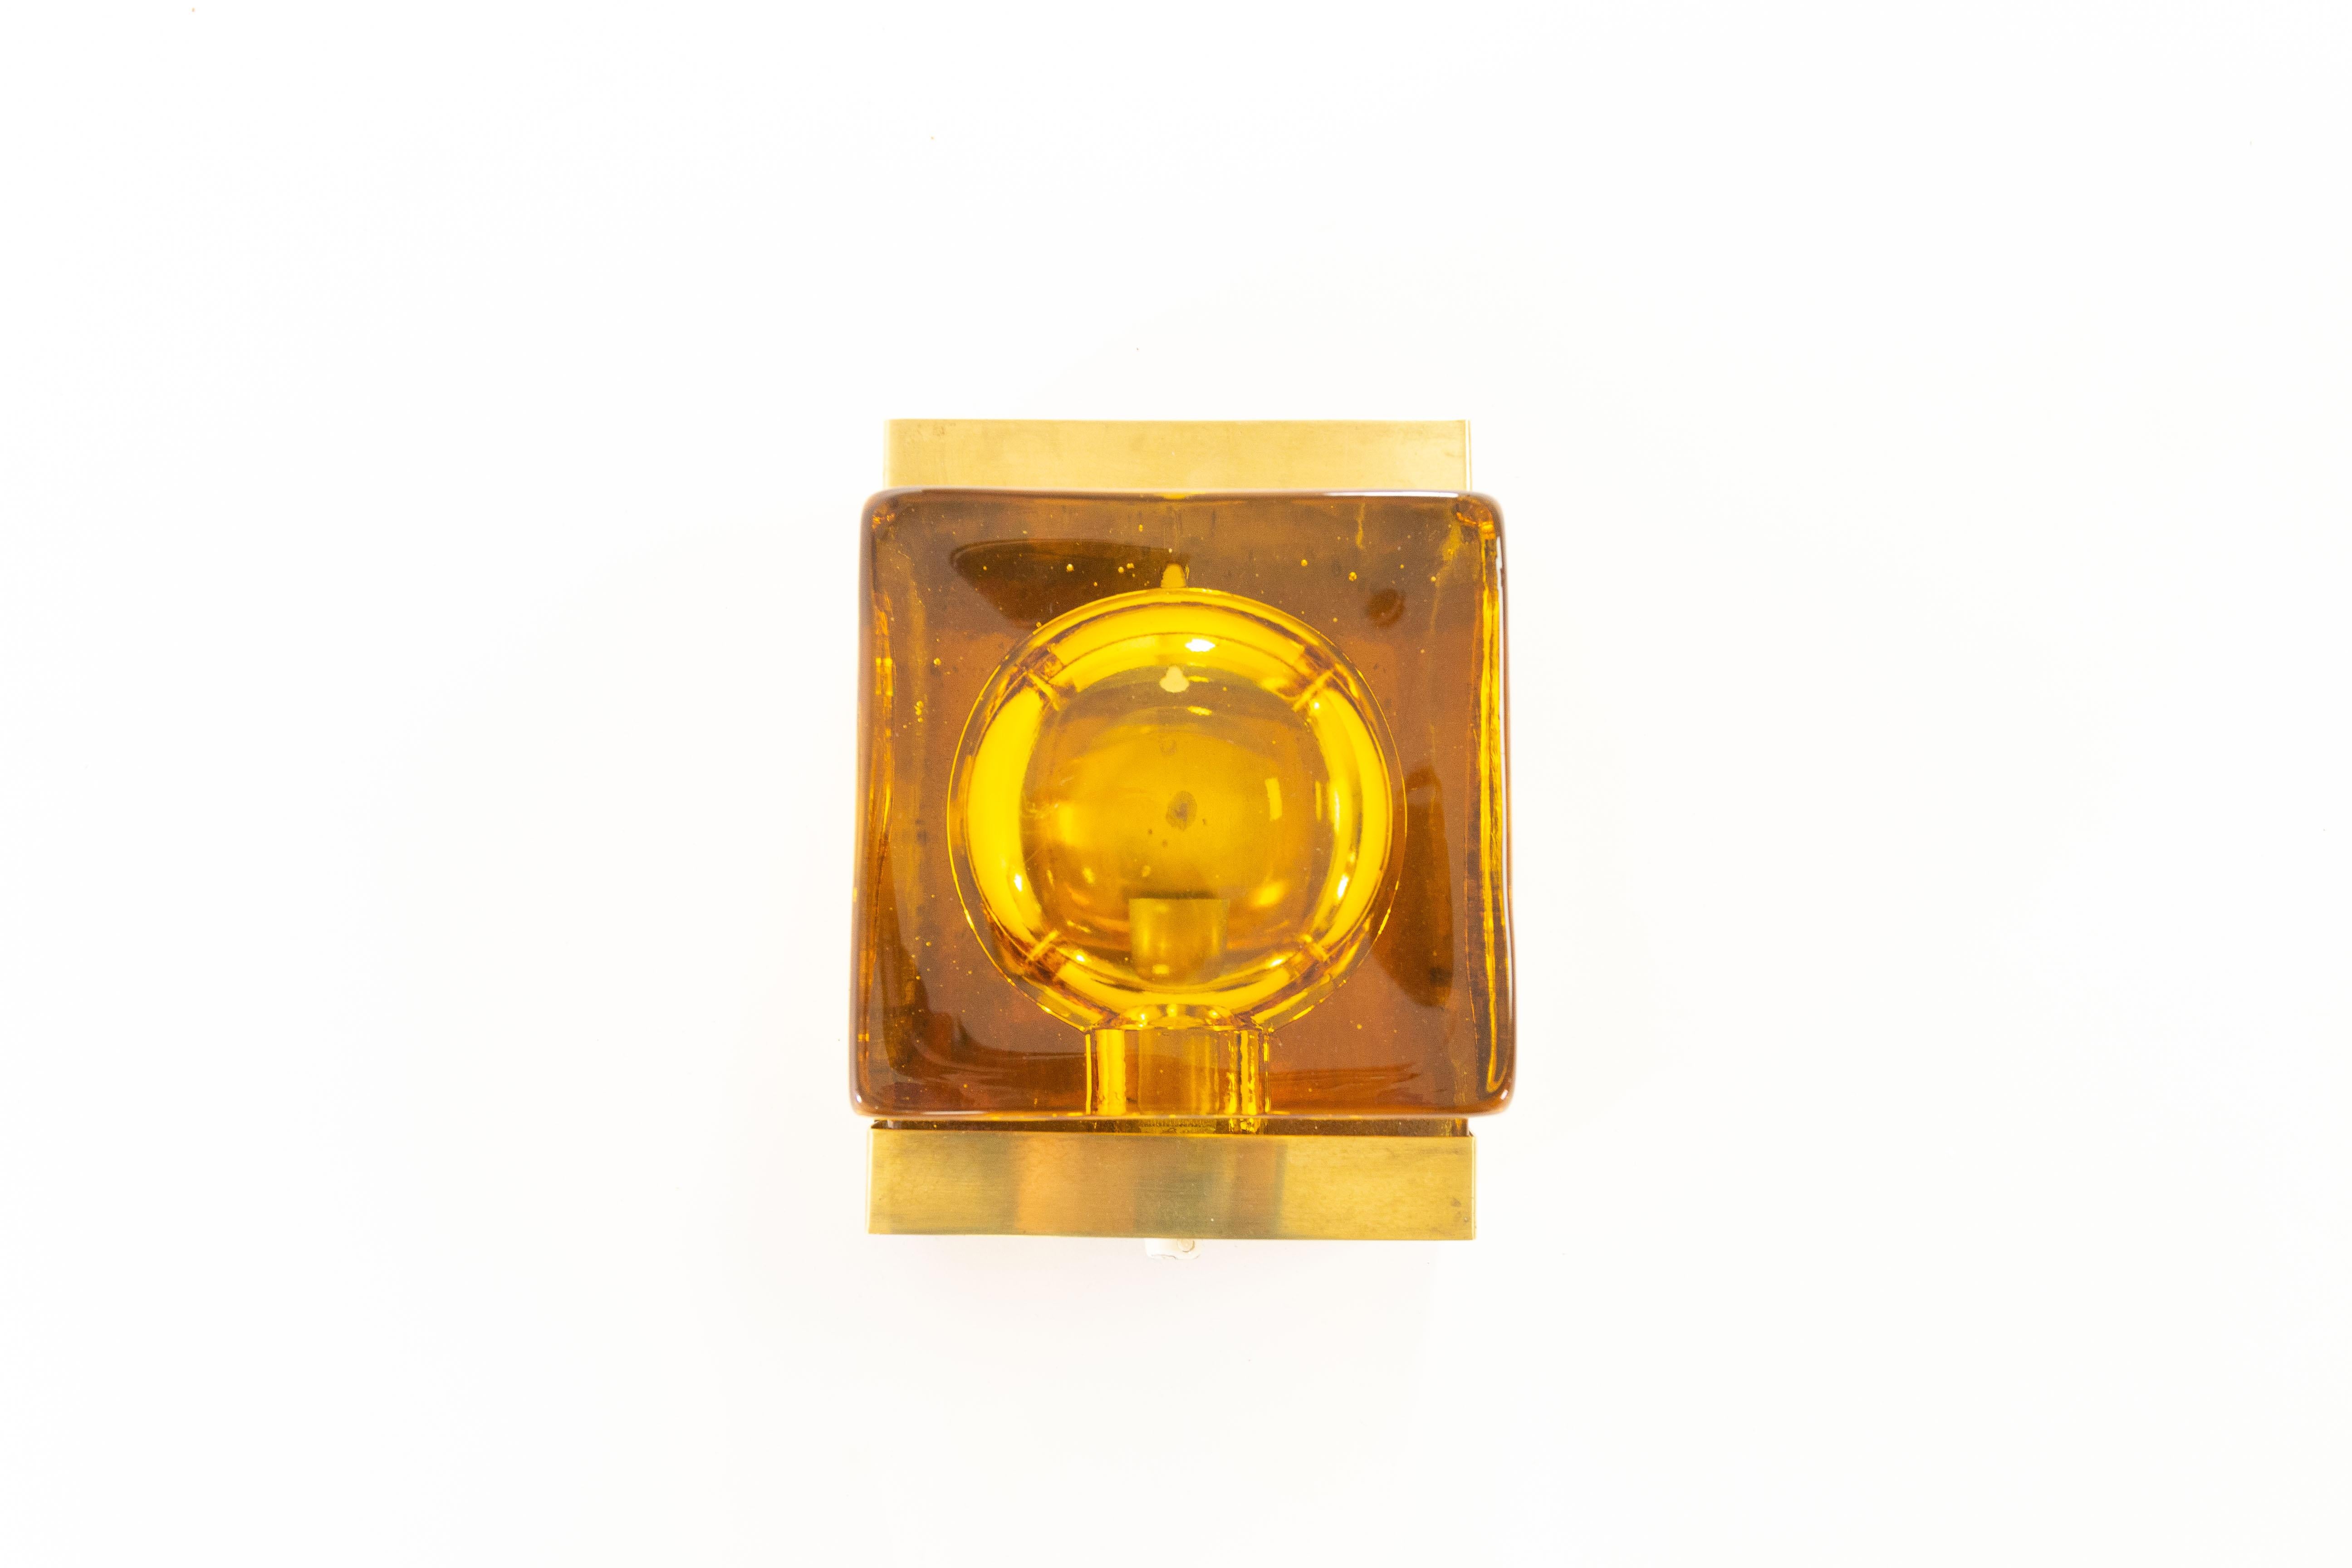 Rare amber coloured Maritim Lampet wall lamp, produced by Danish lighting manufacturer Vitrika in the 1970s.

The lamp consists of two parts: a solid and so rather heavy handmade glass body (2.4 kg / 5.3 lbs) and the brass holder.